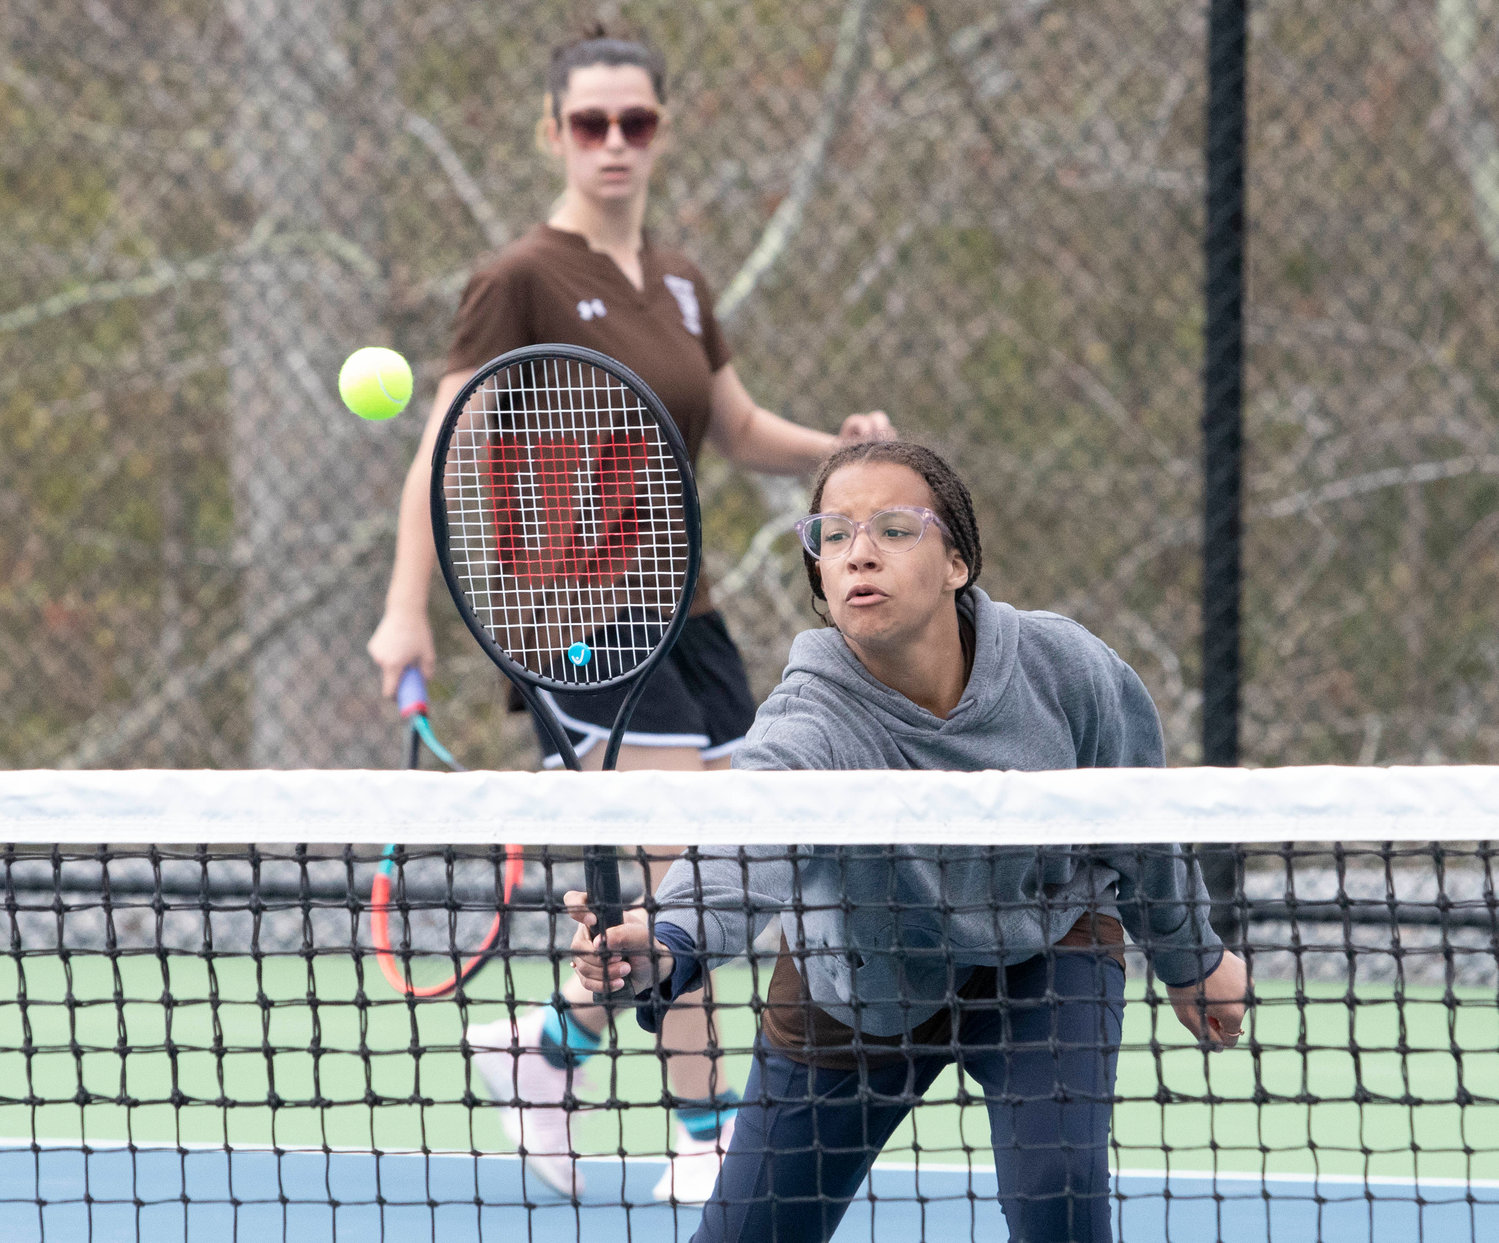 Taliyah Raiche pokes the ball over the net for a winner with teammate Mikhaela Rego (back) looking on during their match against Diman’s Sadie Krauzyk and Sabrina Angeli. The pair fell in straight sets 5-7, 6-7(3-7).